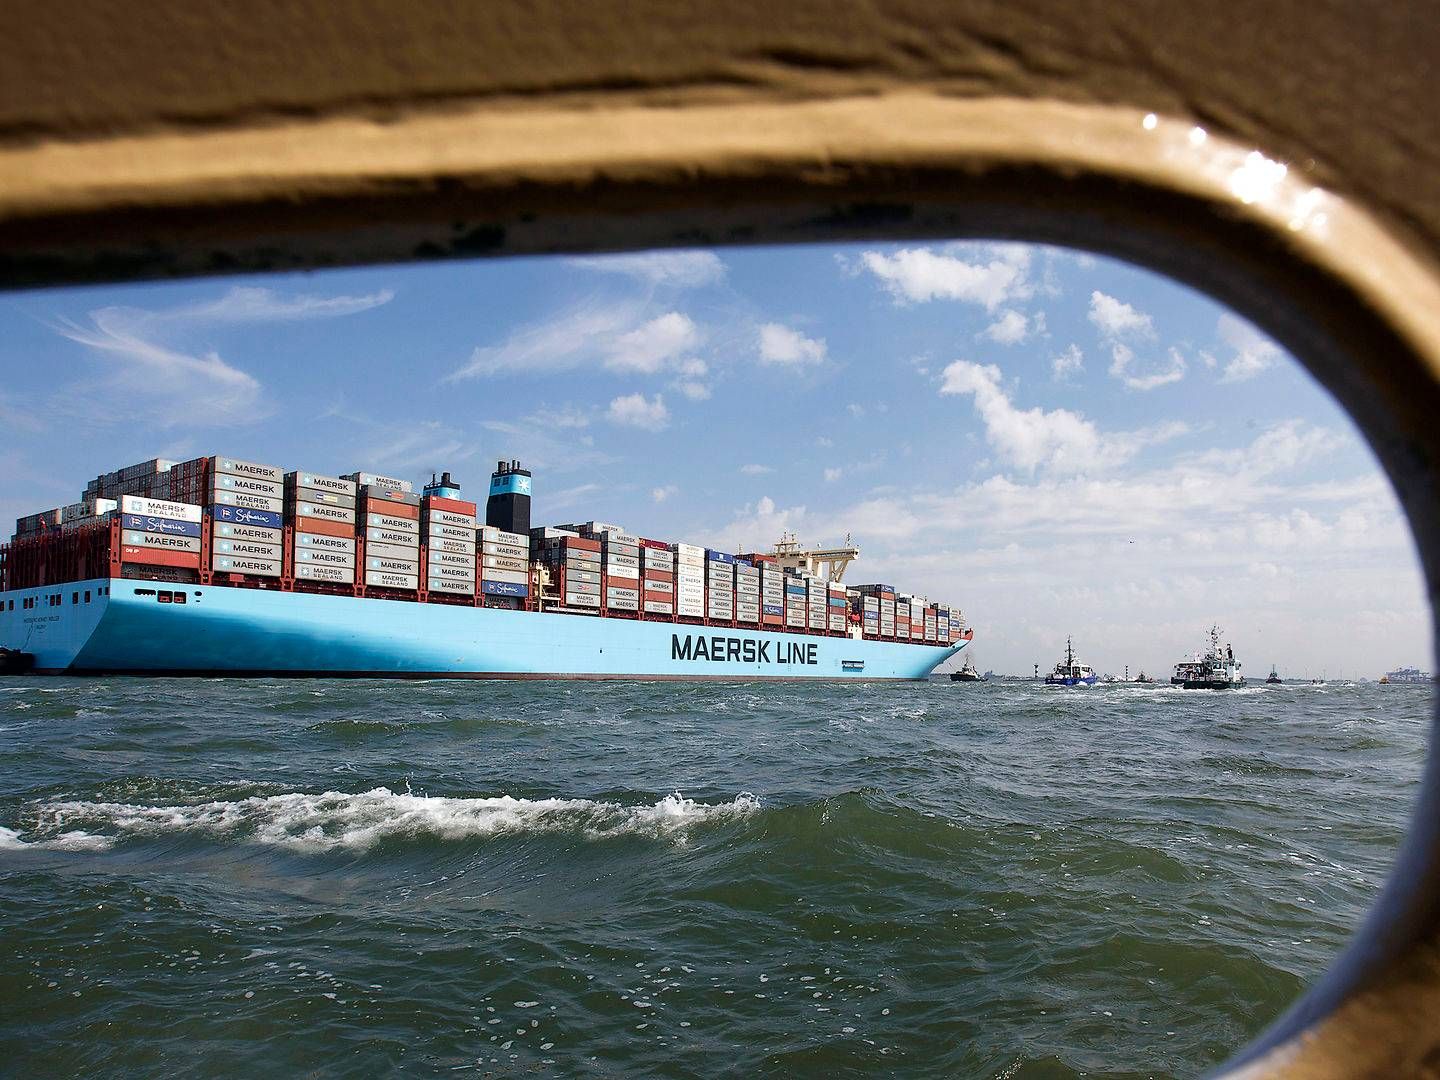 The container vessel Maersk Mc-Kinney Moller, which Maersk received in June 2013, was at the time the first and largest ship in the Megamax class, MGX-23 ships, writes Alphaliner.